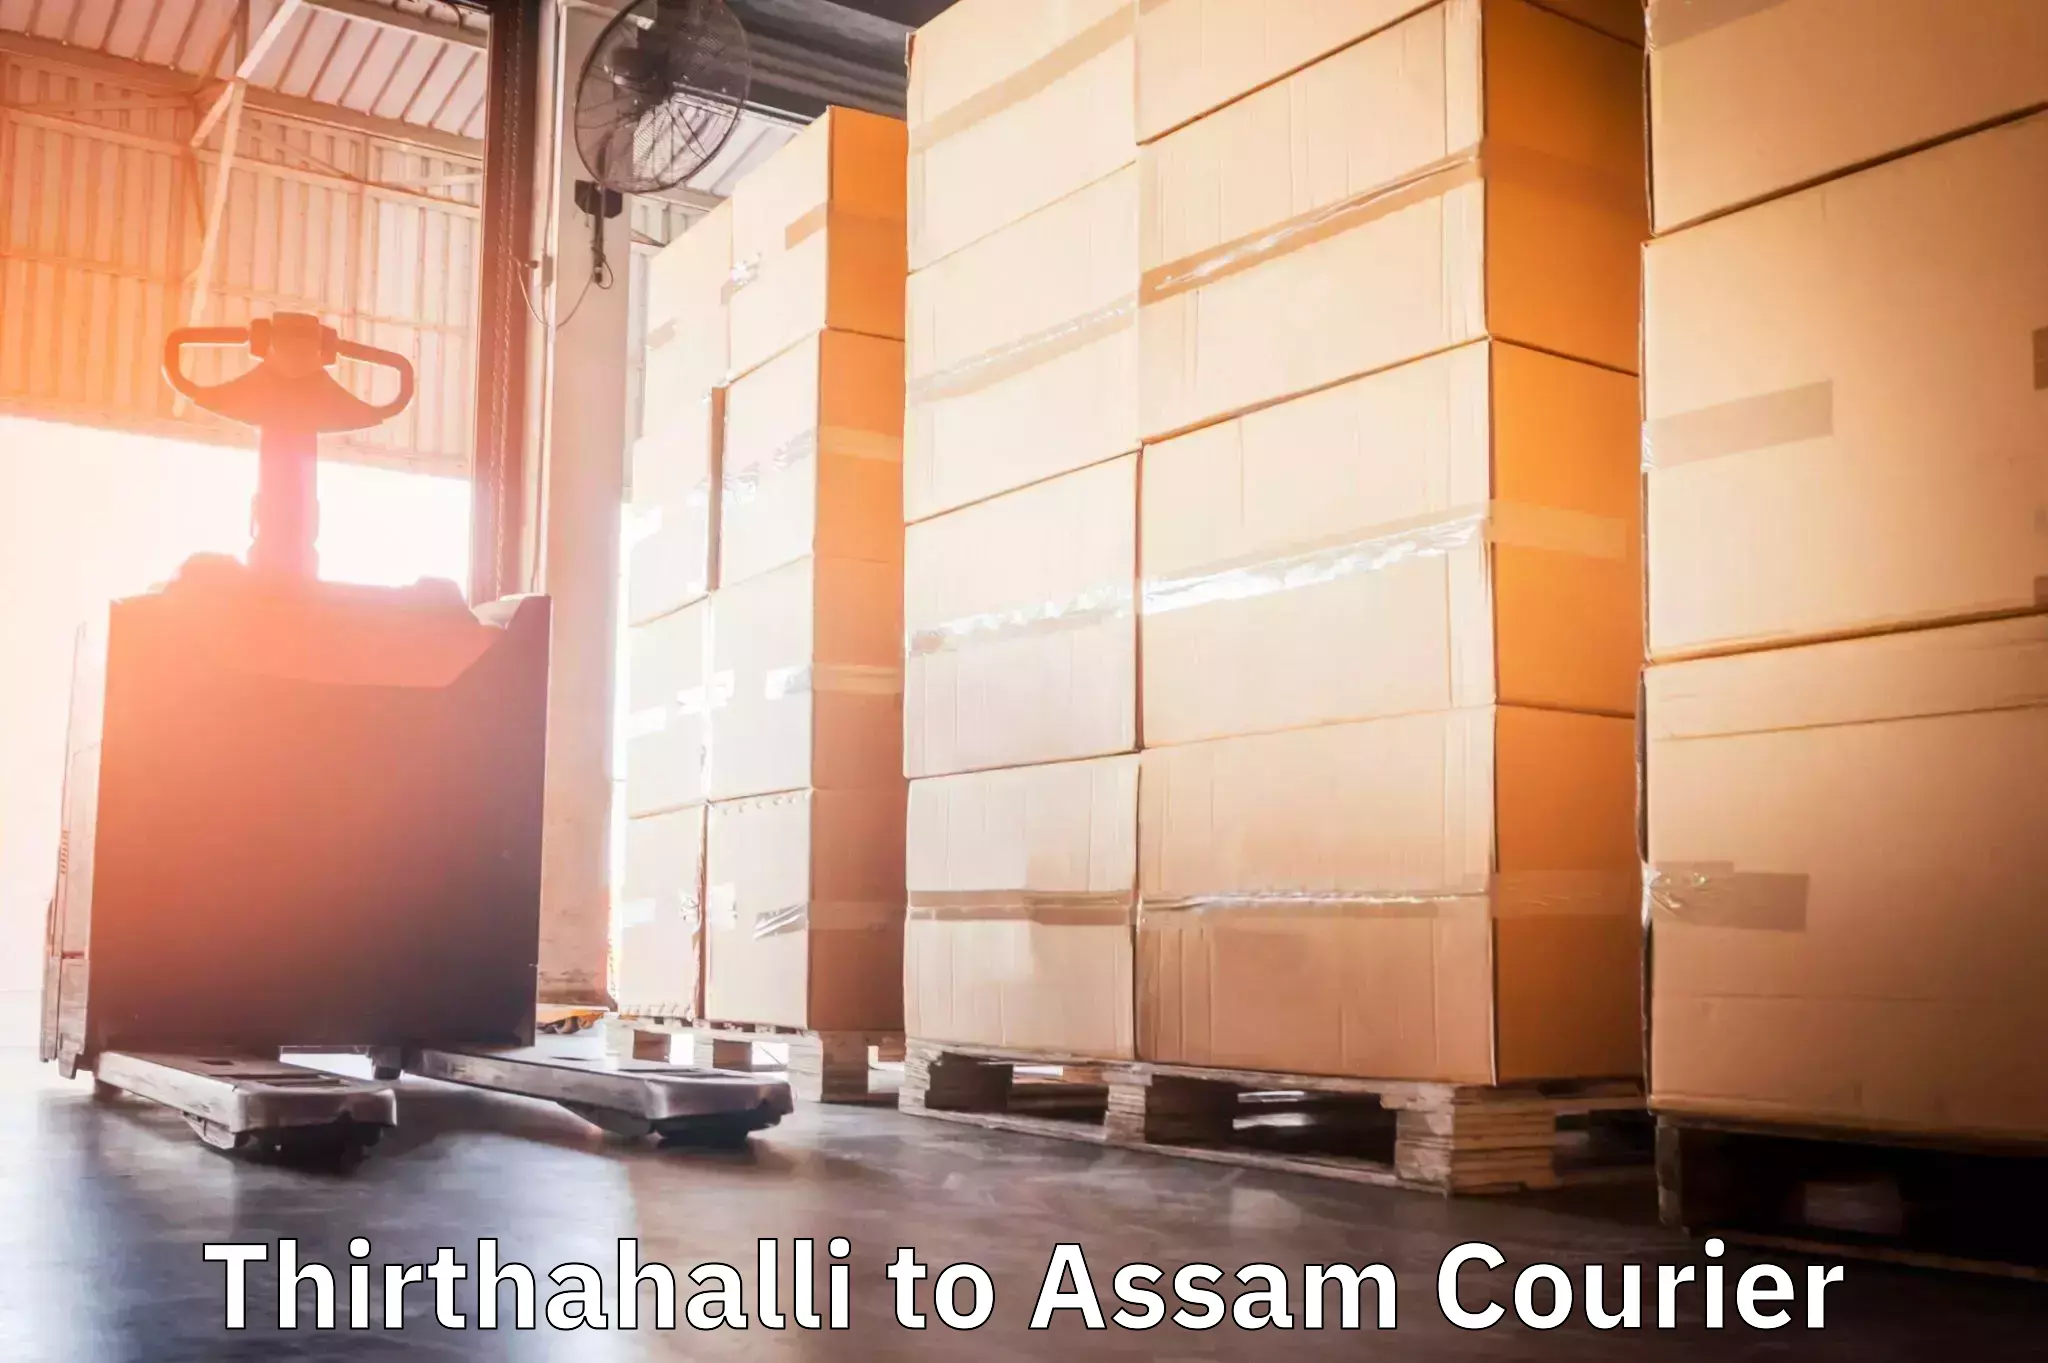 Subscription-based courier Thirthahalli to Assam